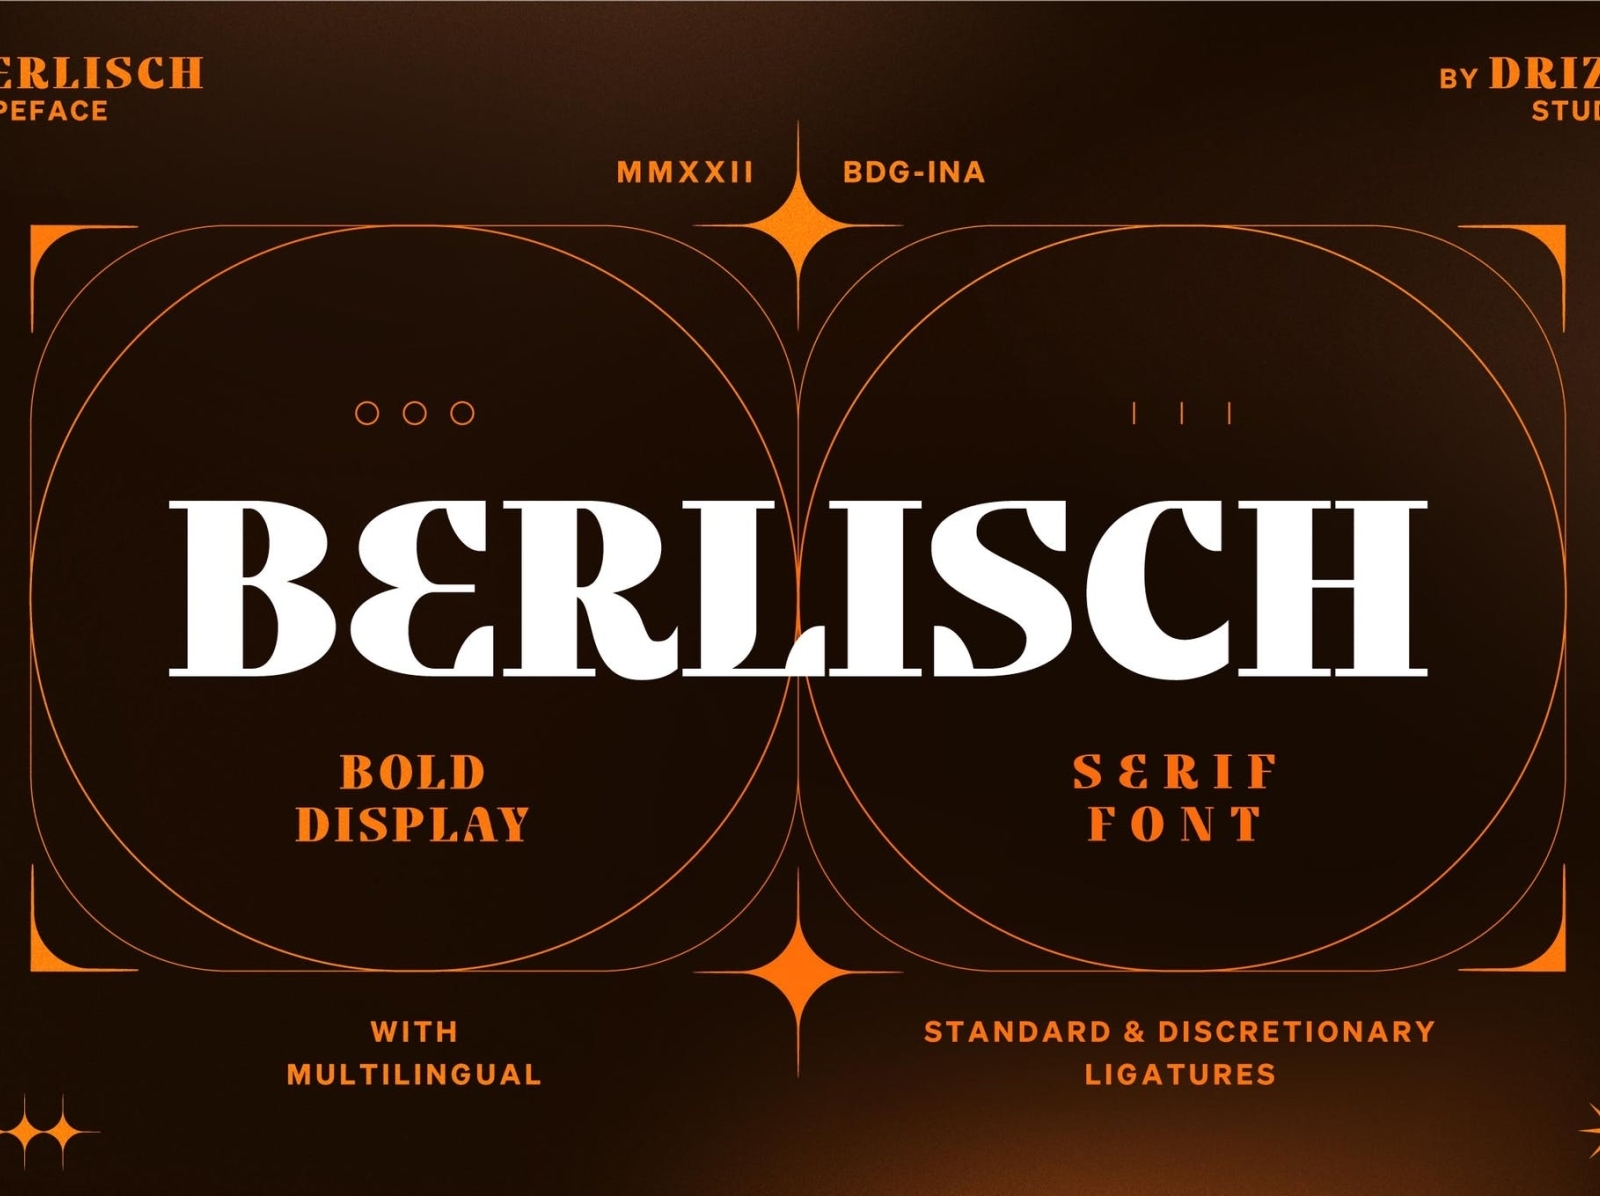 Berlicsh Font by Display Fonts on Dribbble